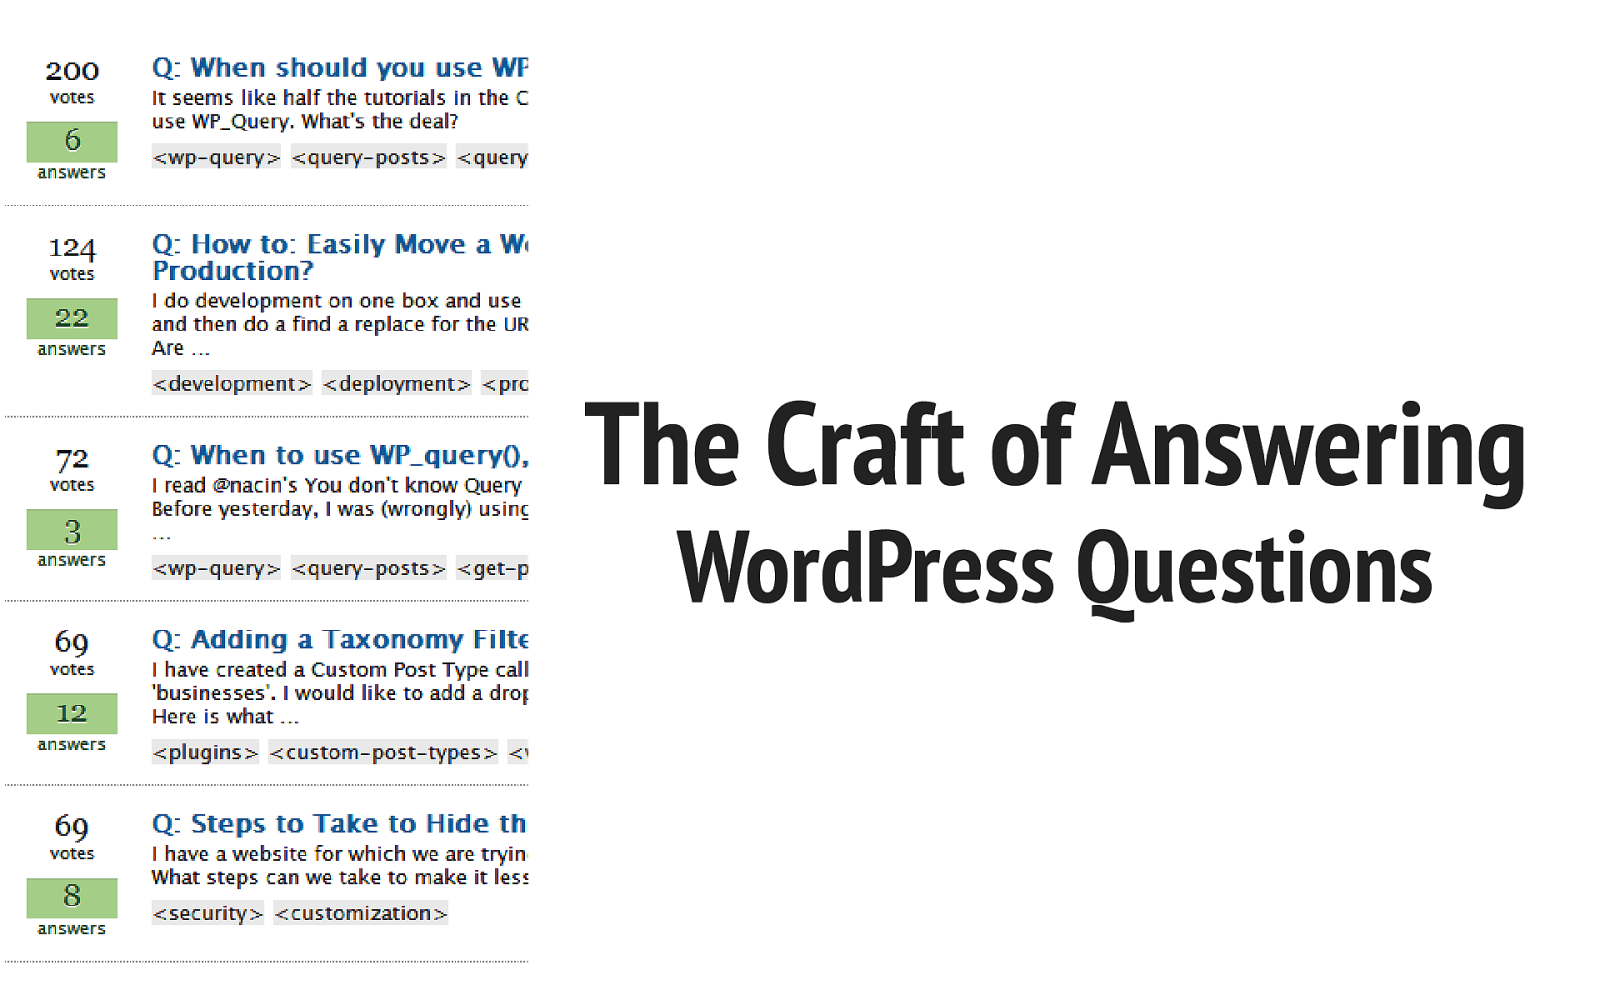 The Craft of Answering WordPress Questions